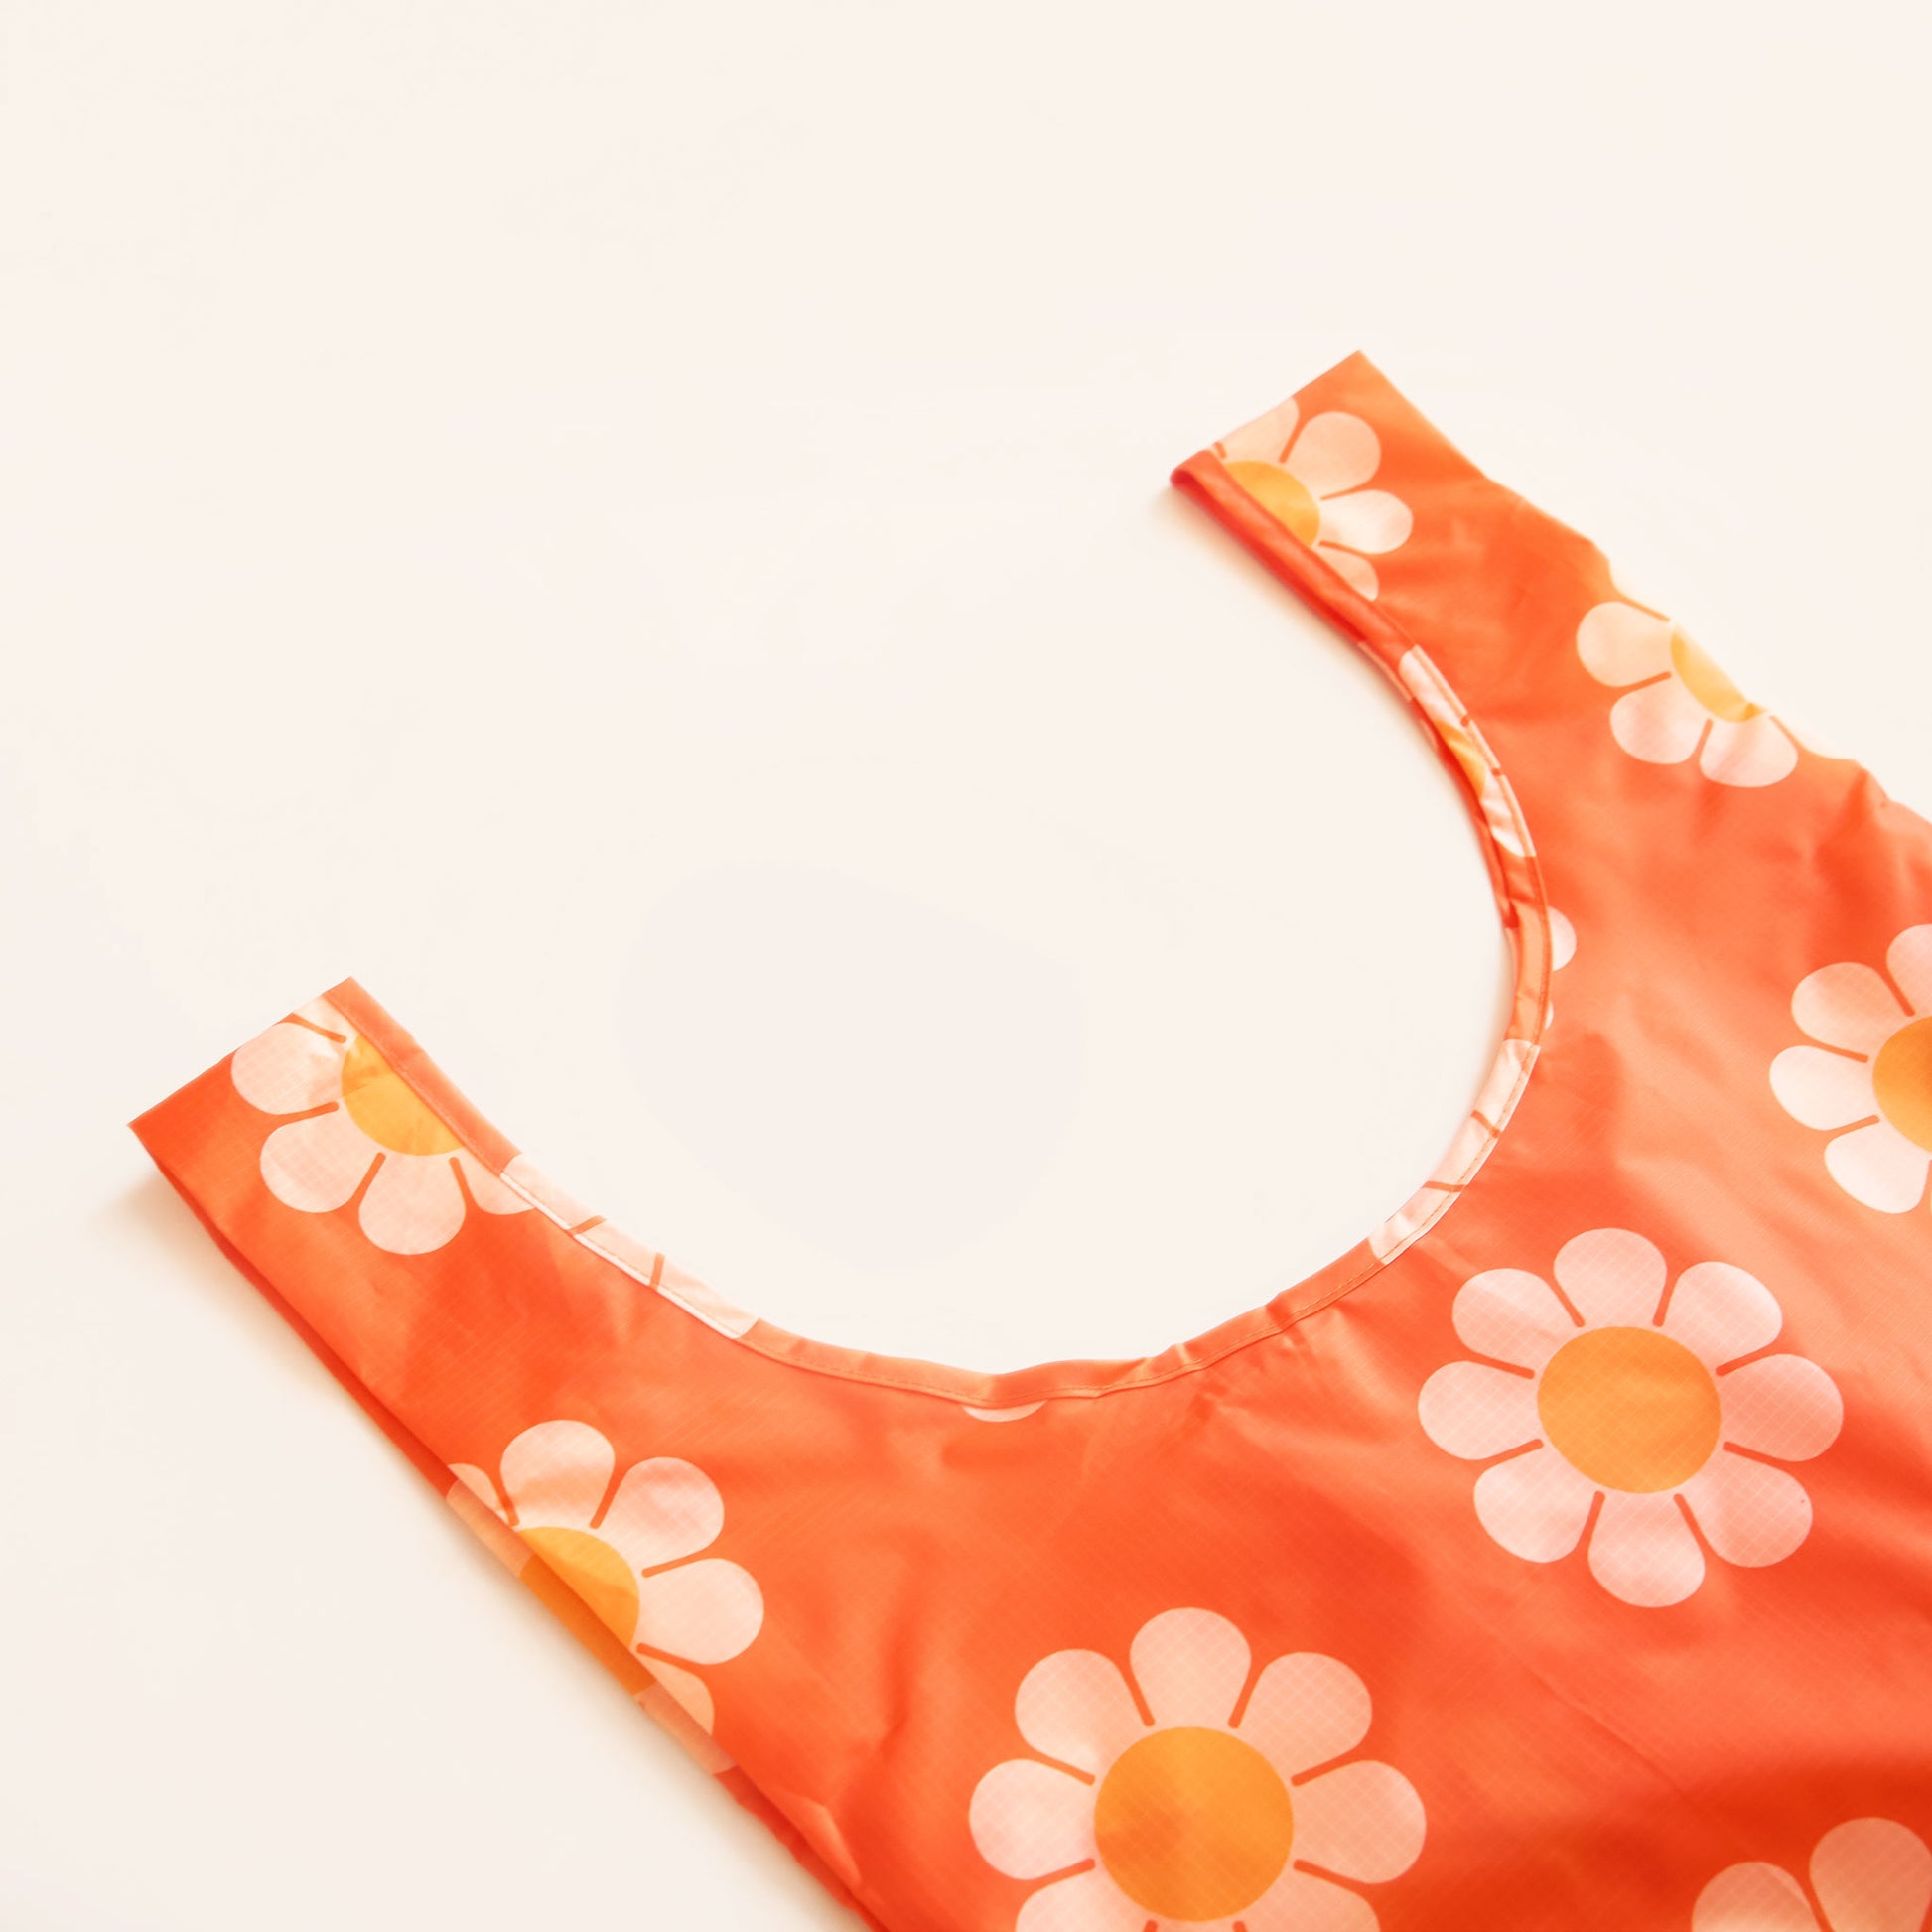 Zoomed view of red-orange nylon reusable bag. The bag is covered in a print of large simple flower with white petals and orange centers. 